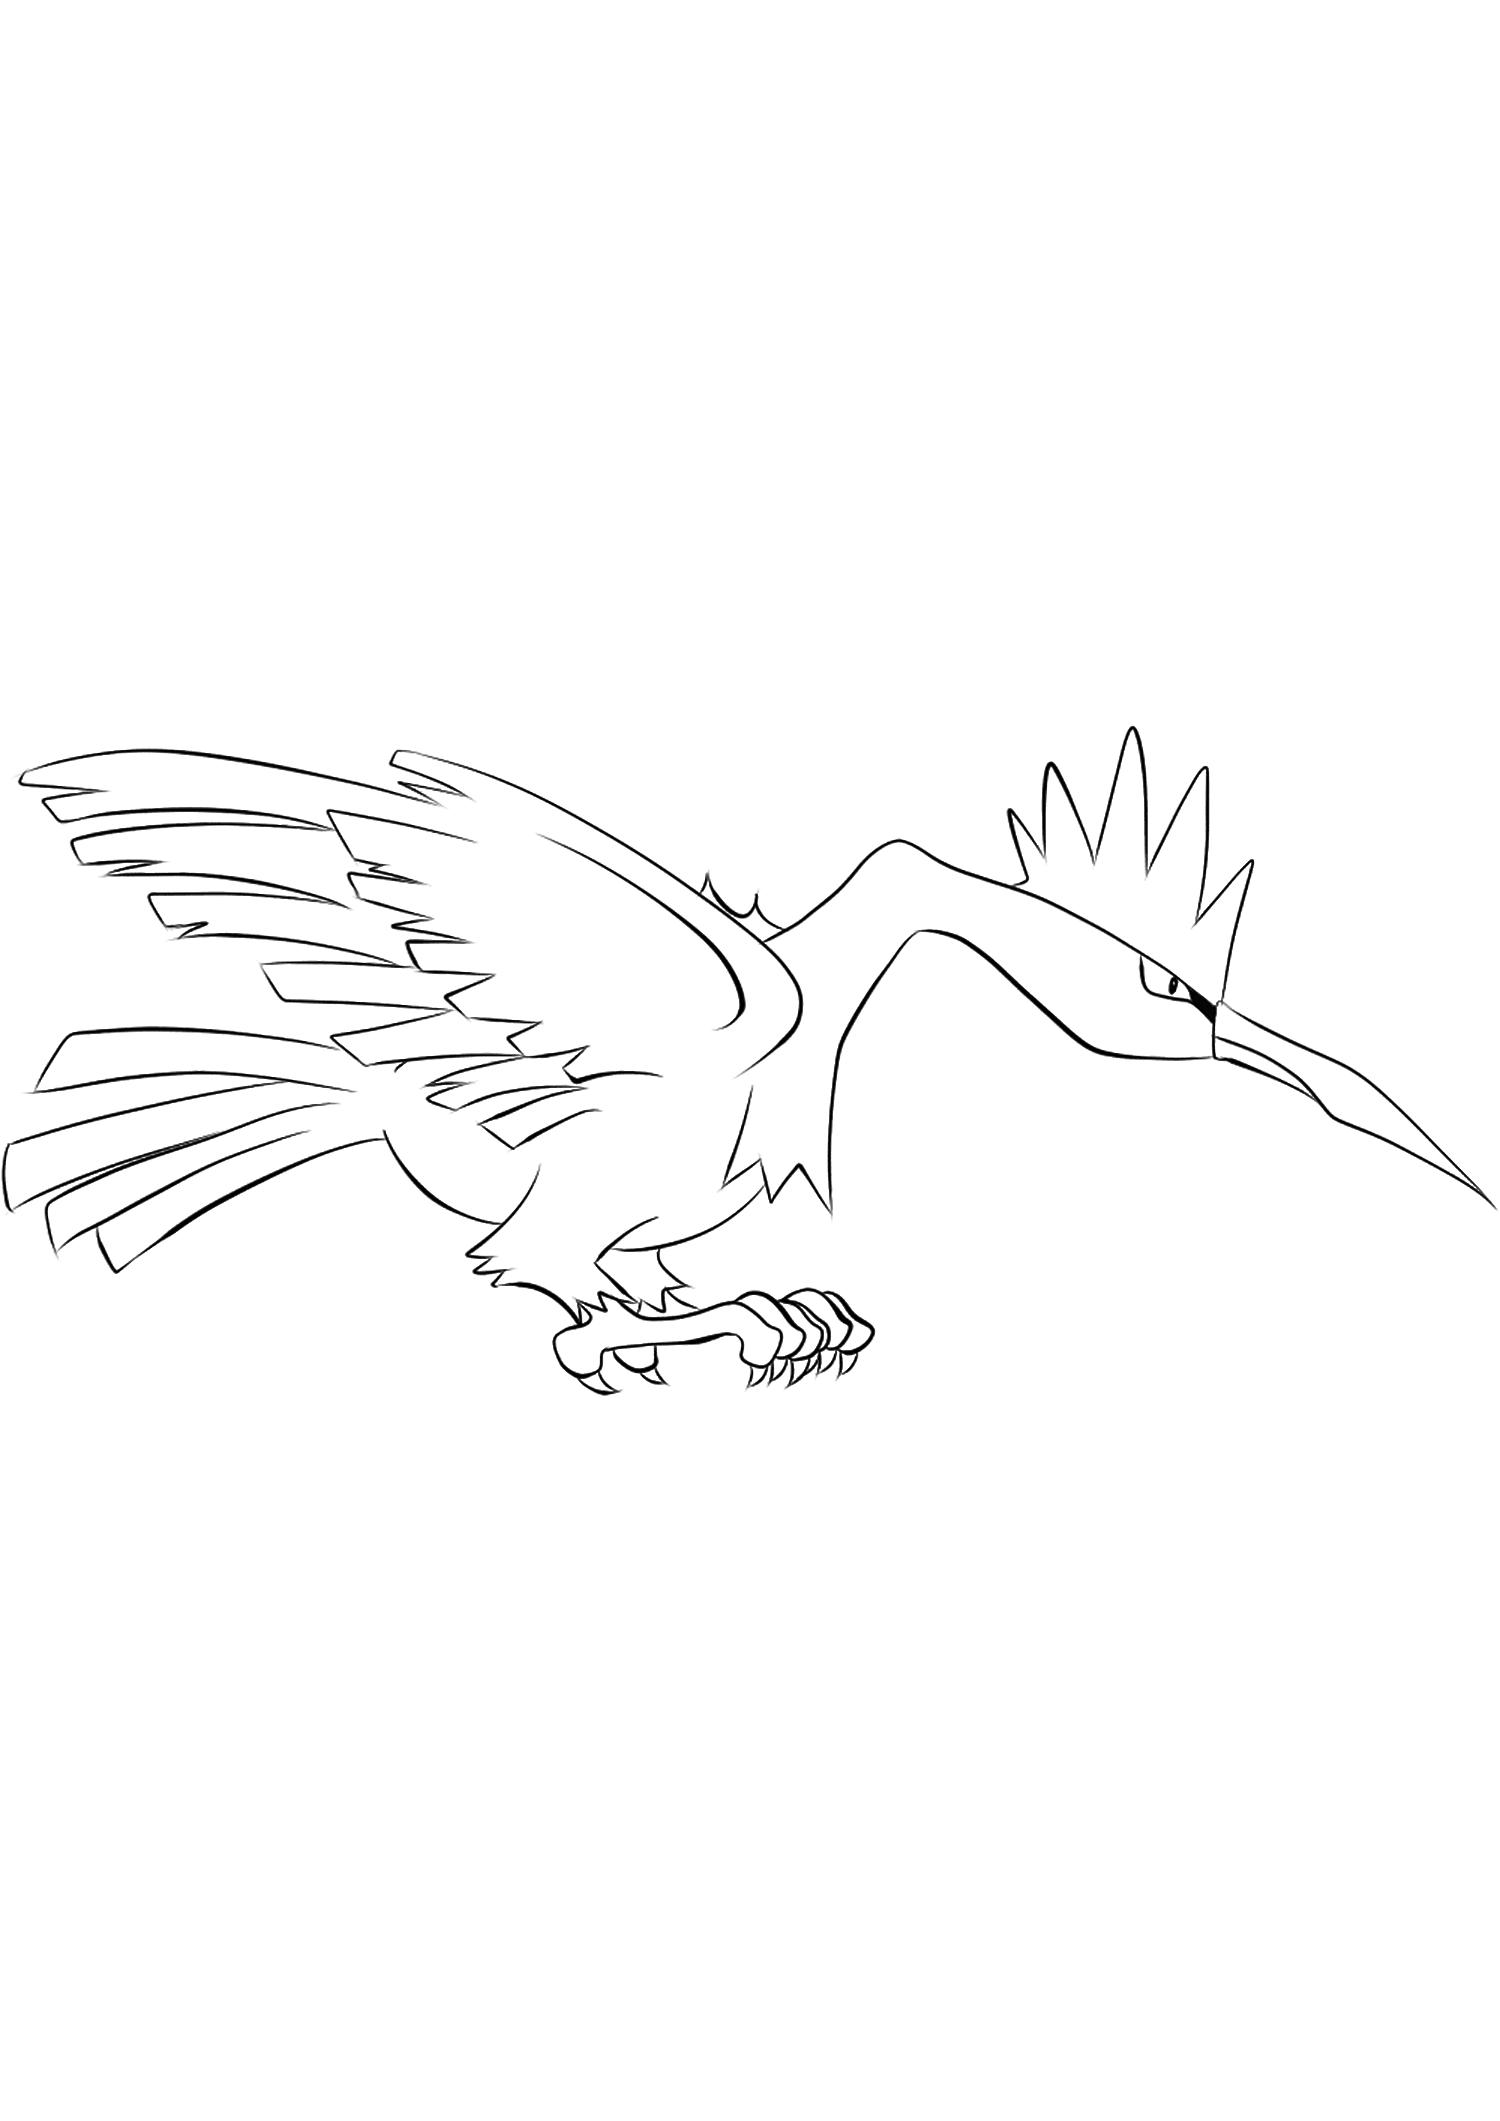 Fearow (No.22). Fearow Coloring page, Generation I Pokemon of type Normal and FlyingOriginal image credit: Pokemon linearts by Lilly Gerbil'font-size:smaller;color:gray'>Permission: All rights reserved © Pokemon company and Ken Sugimori.